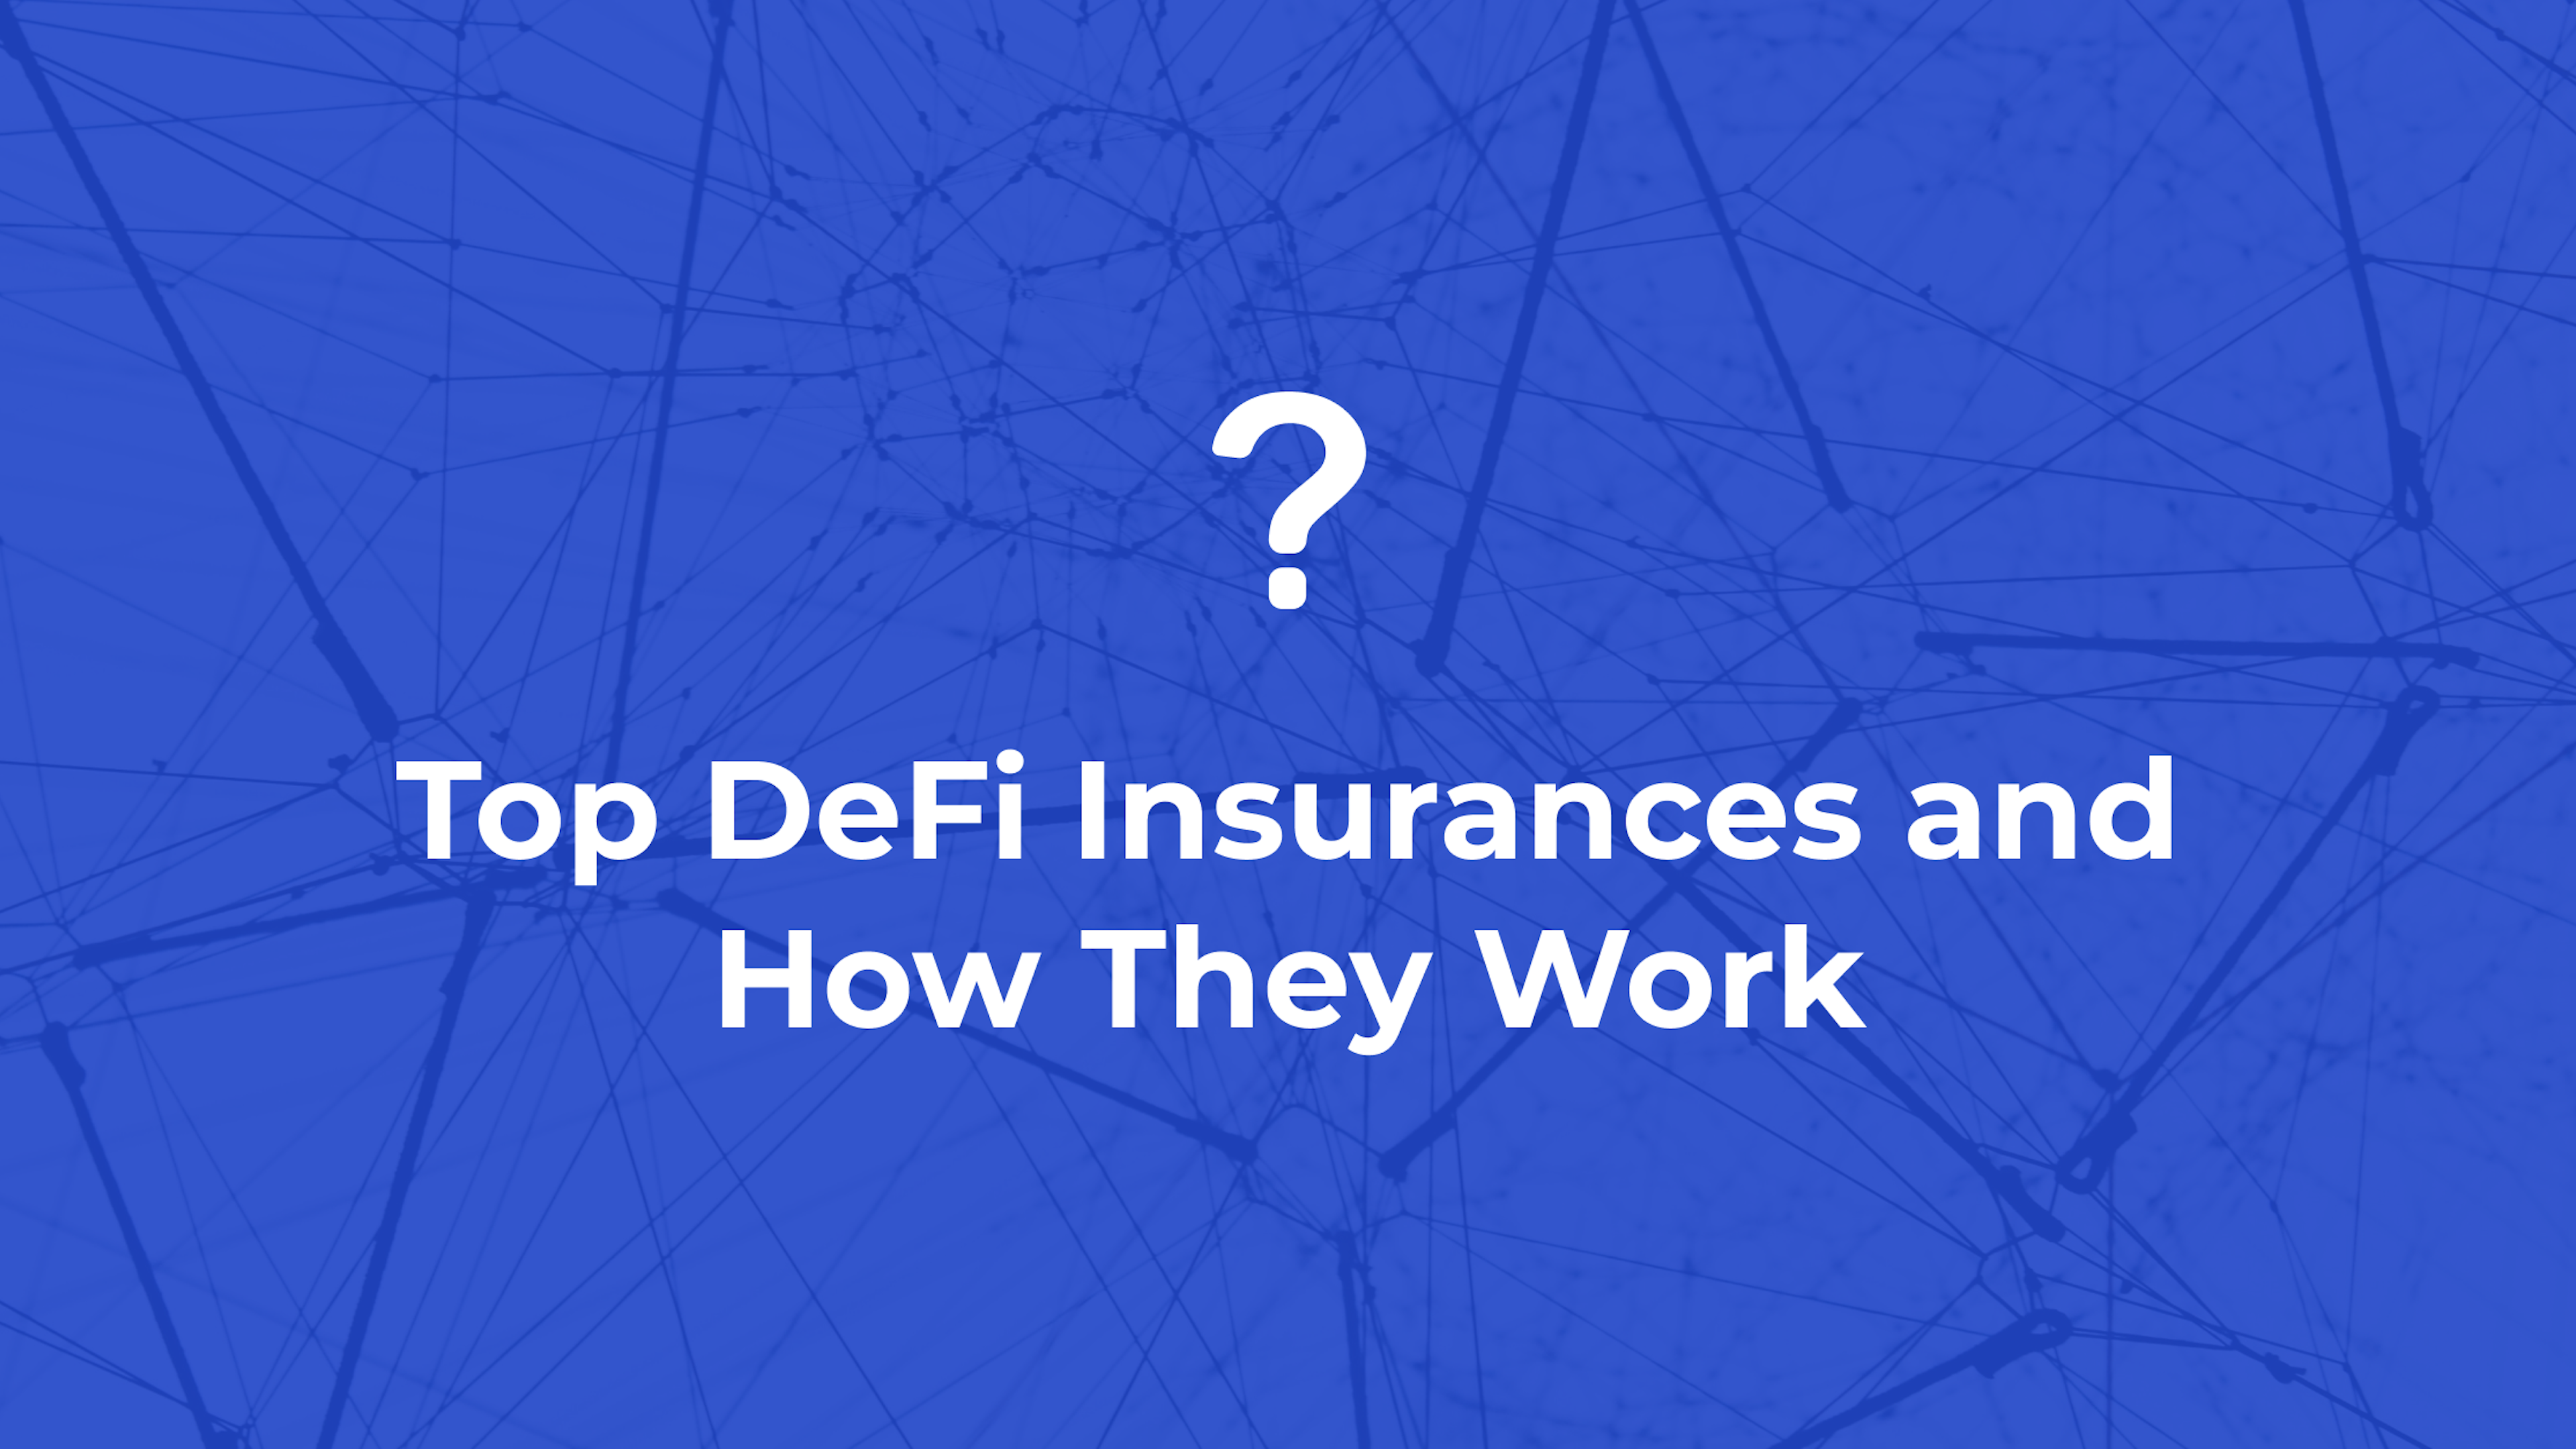 Top DeFi Insurances and How They Work